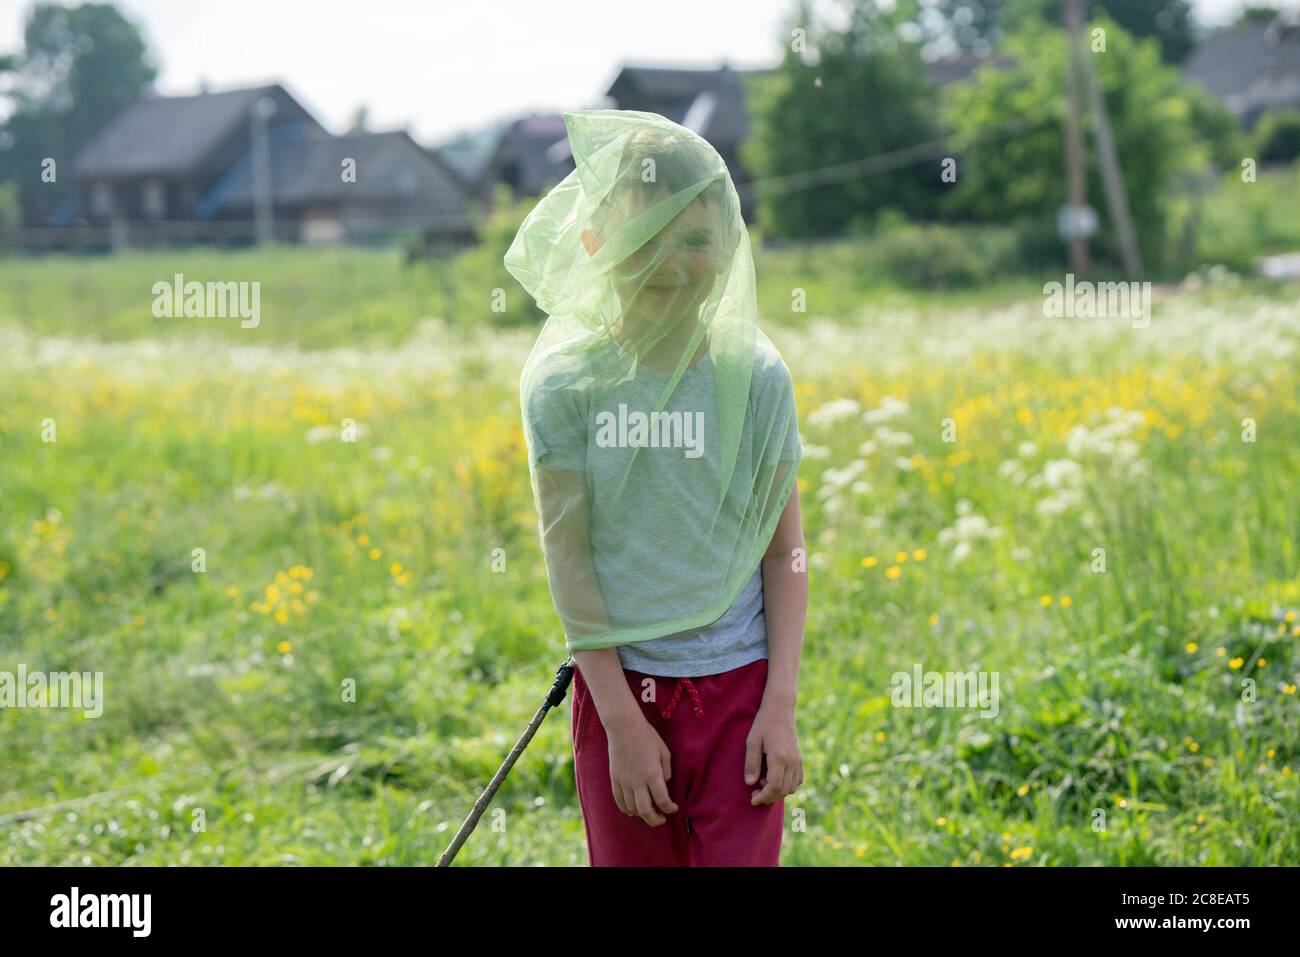 Playful boy wearing butterfly net while standing on grassy land Stock Photo